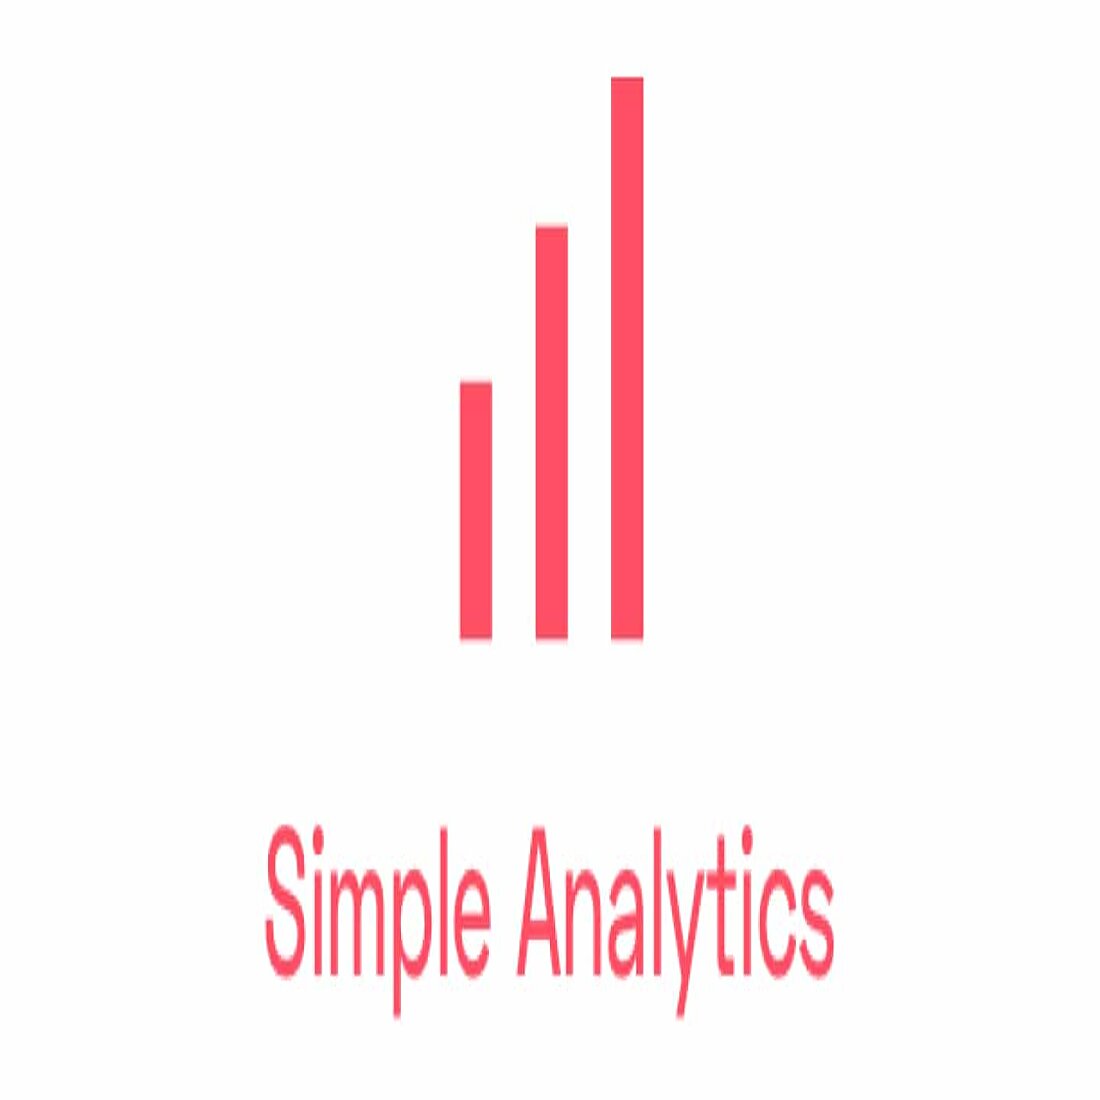 Simple Analytics is one of the best privacy-perfect Wordpress analytics tools